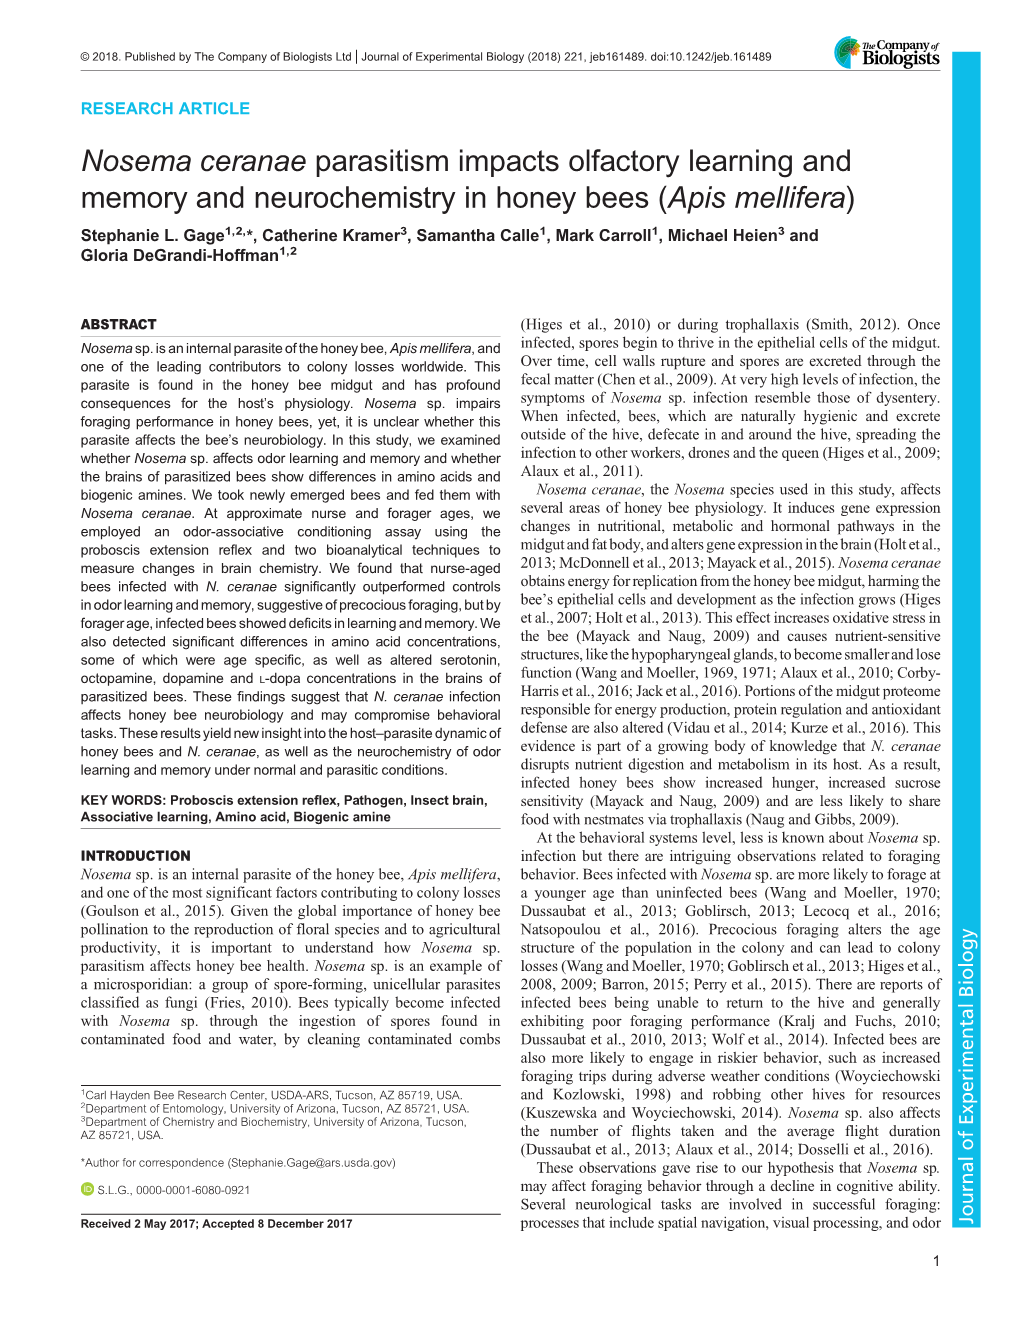 Nosema Ceranae Parasitism Impacts Olfactory Learning and Memory and Neurochemistry in Honey Bees (Apis Mellifera) Stephanie L